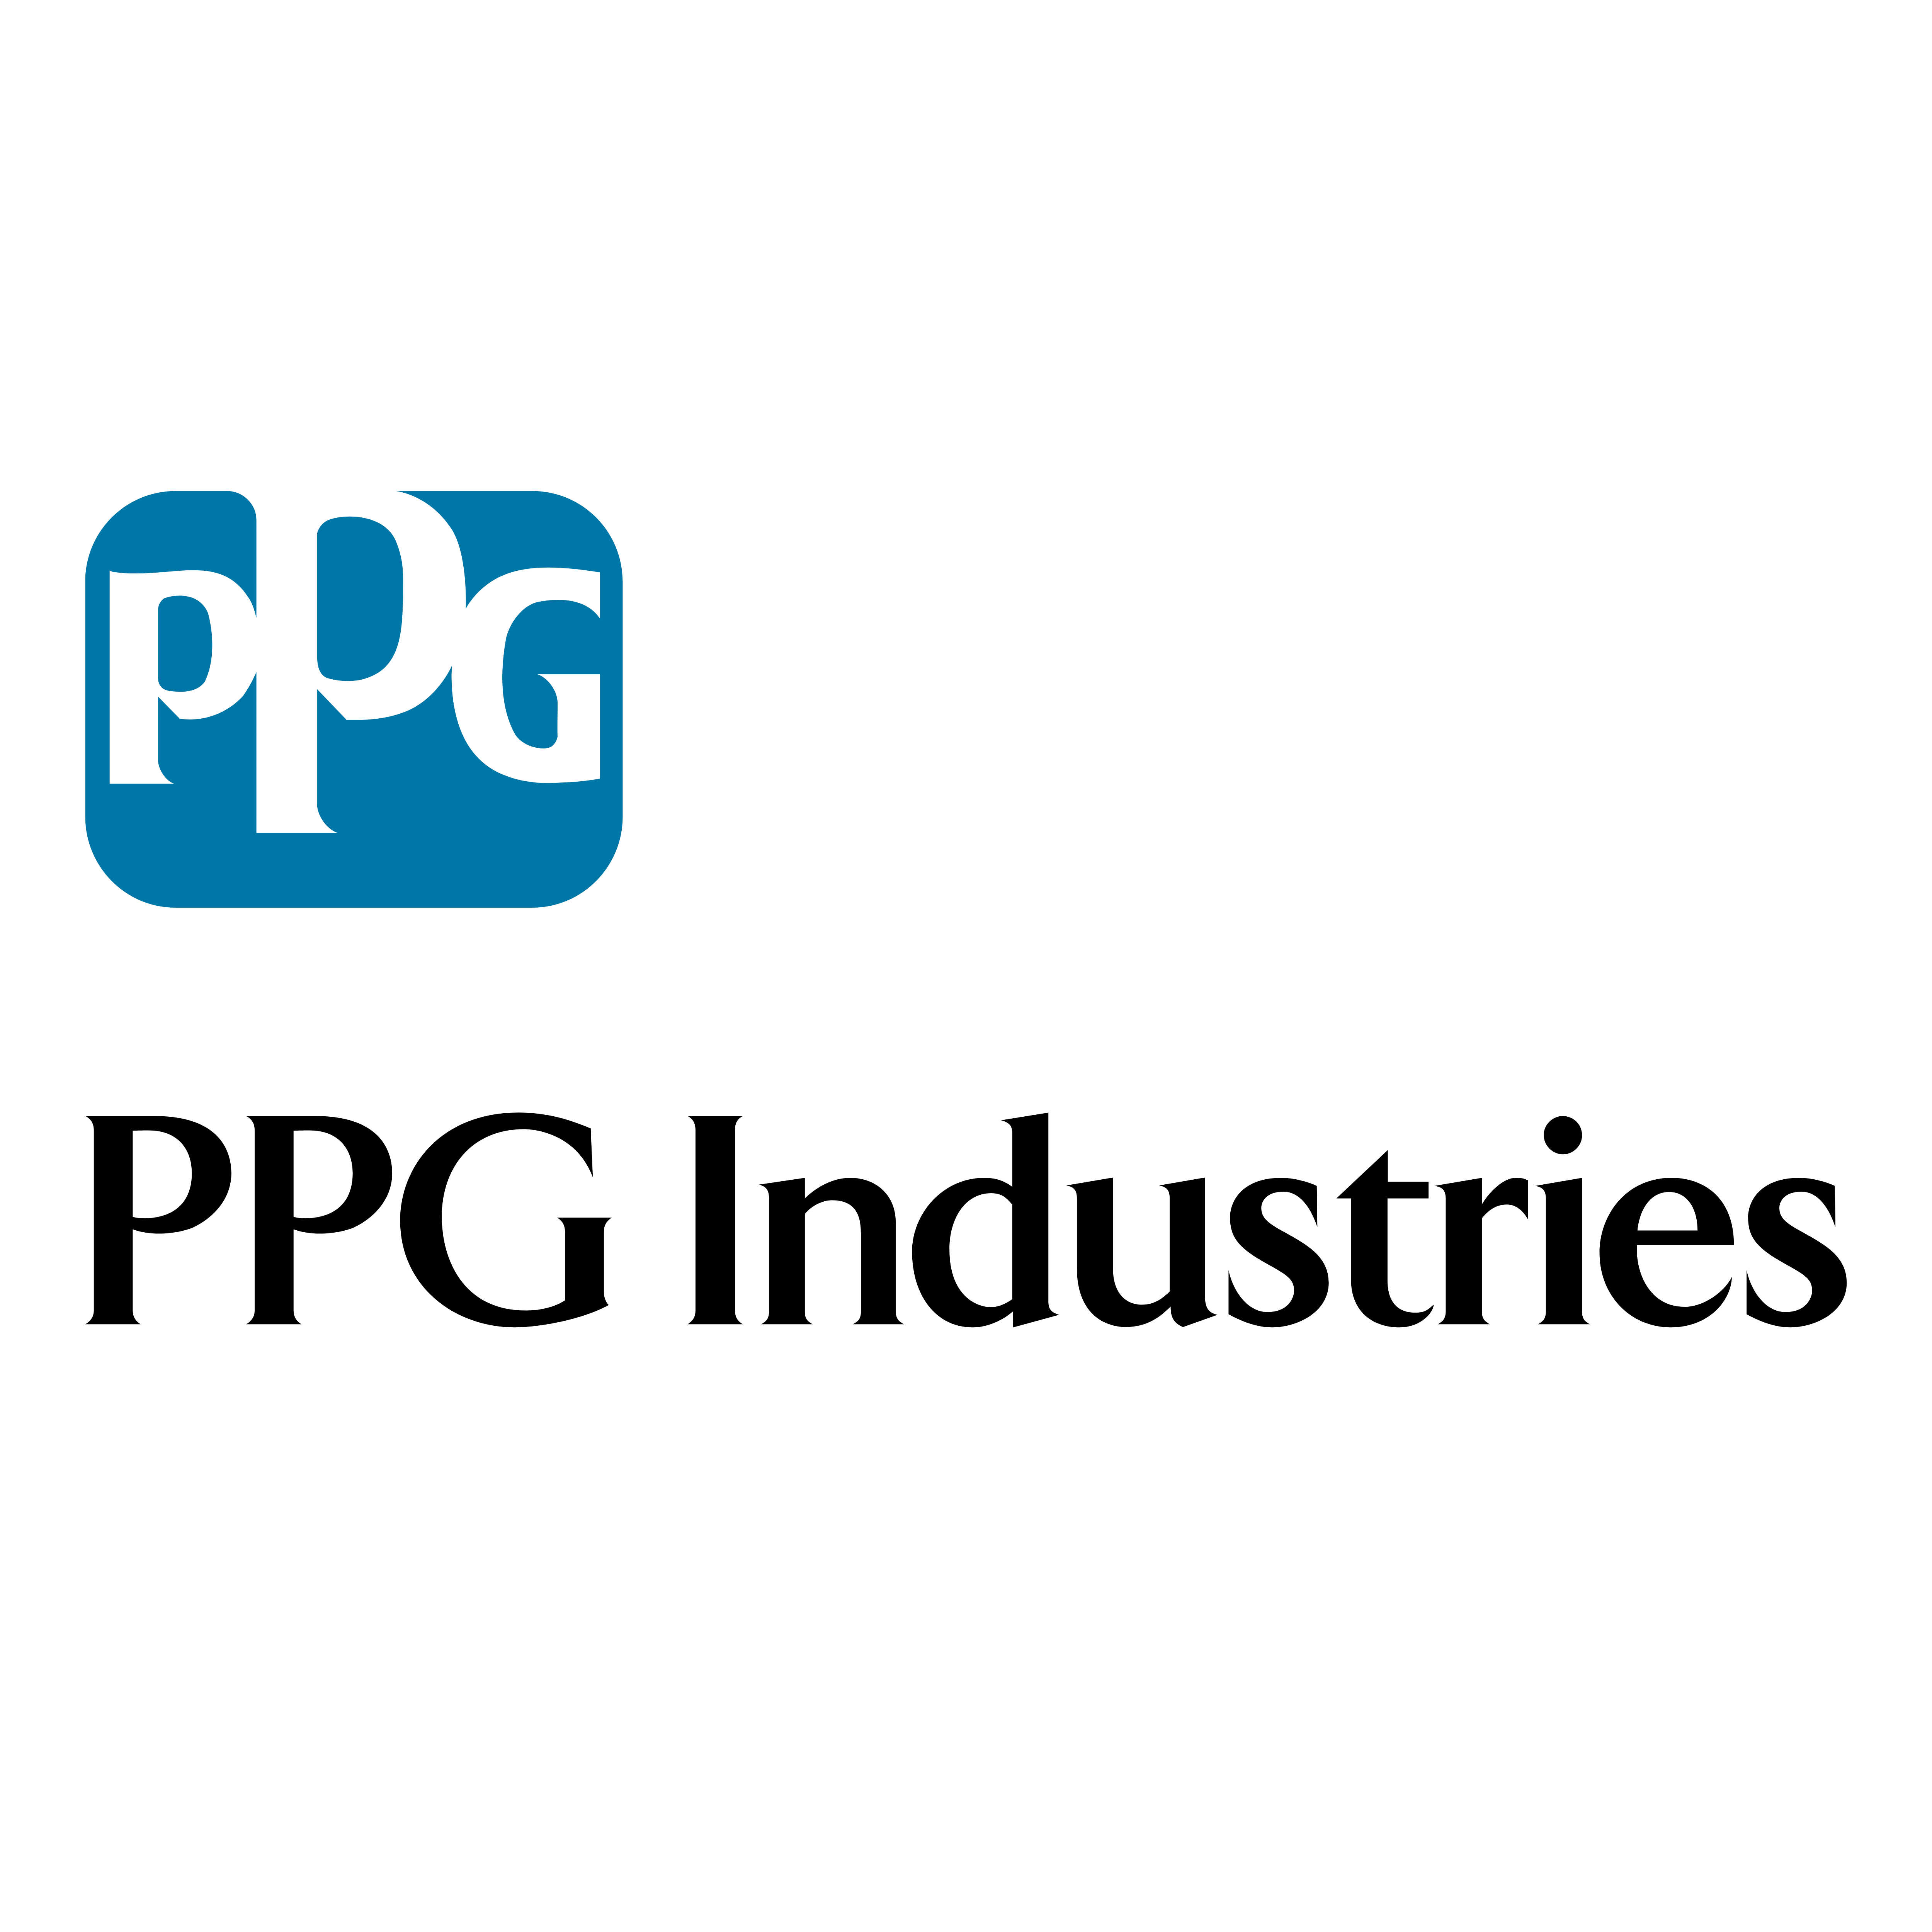 PPG Logo - PPG Industries – Logos Download